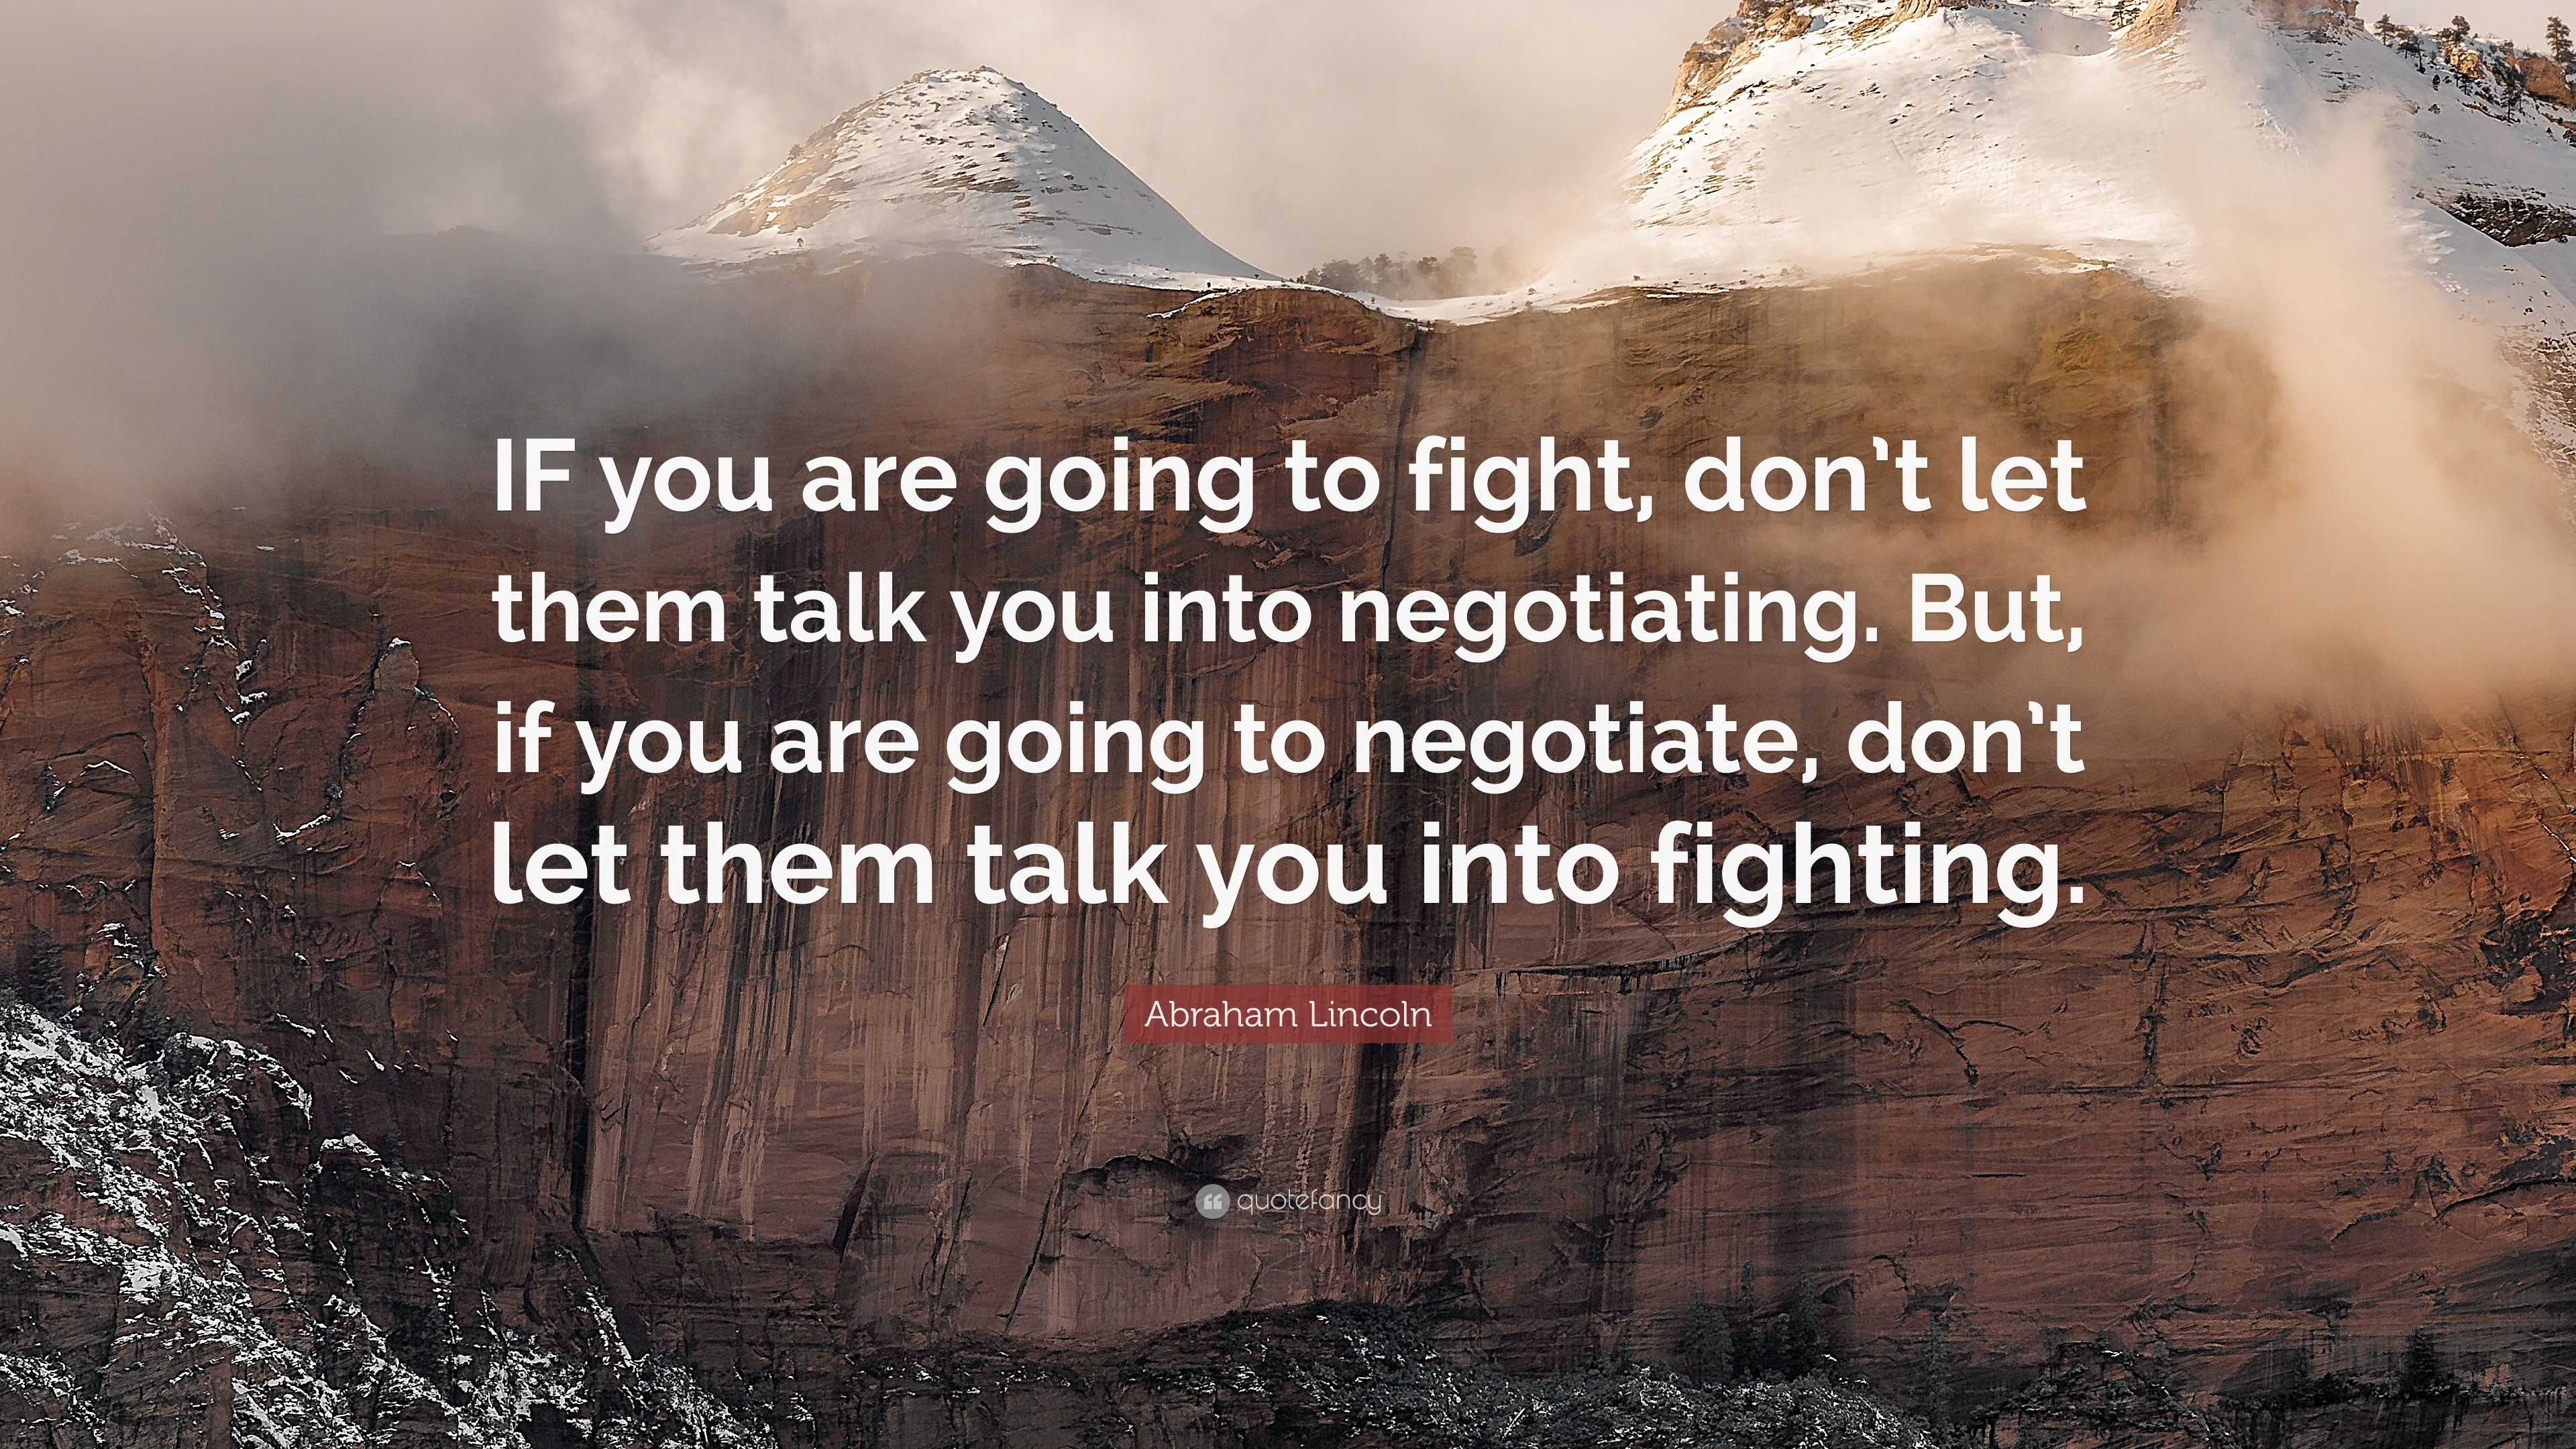 Abraham Lincoln Quote: “IF you are going to fight, don’t let them talk ...